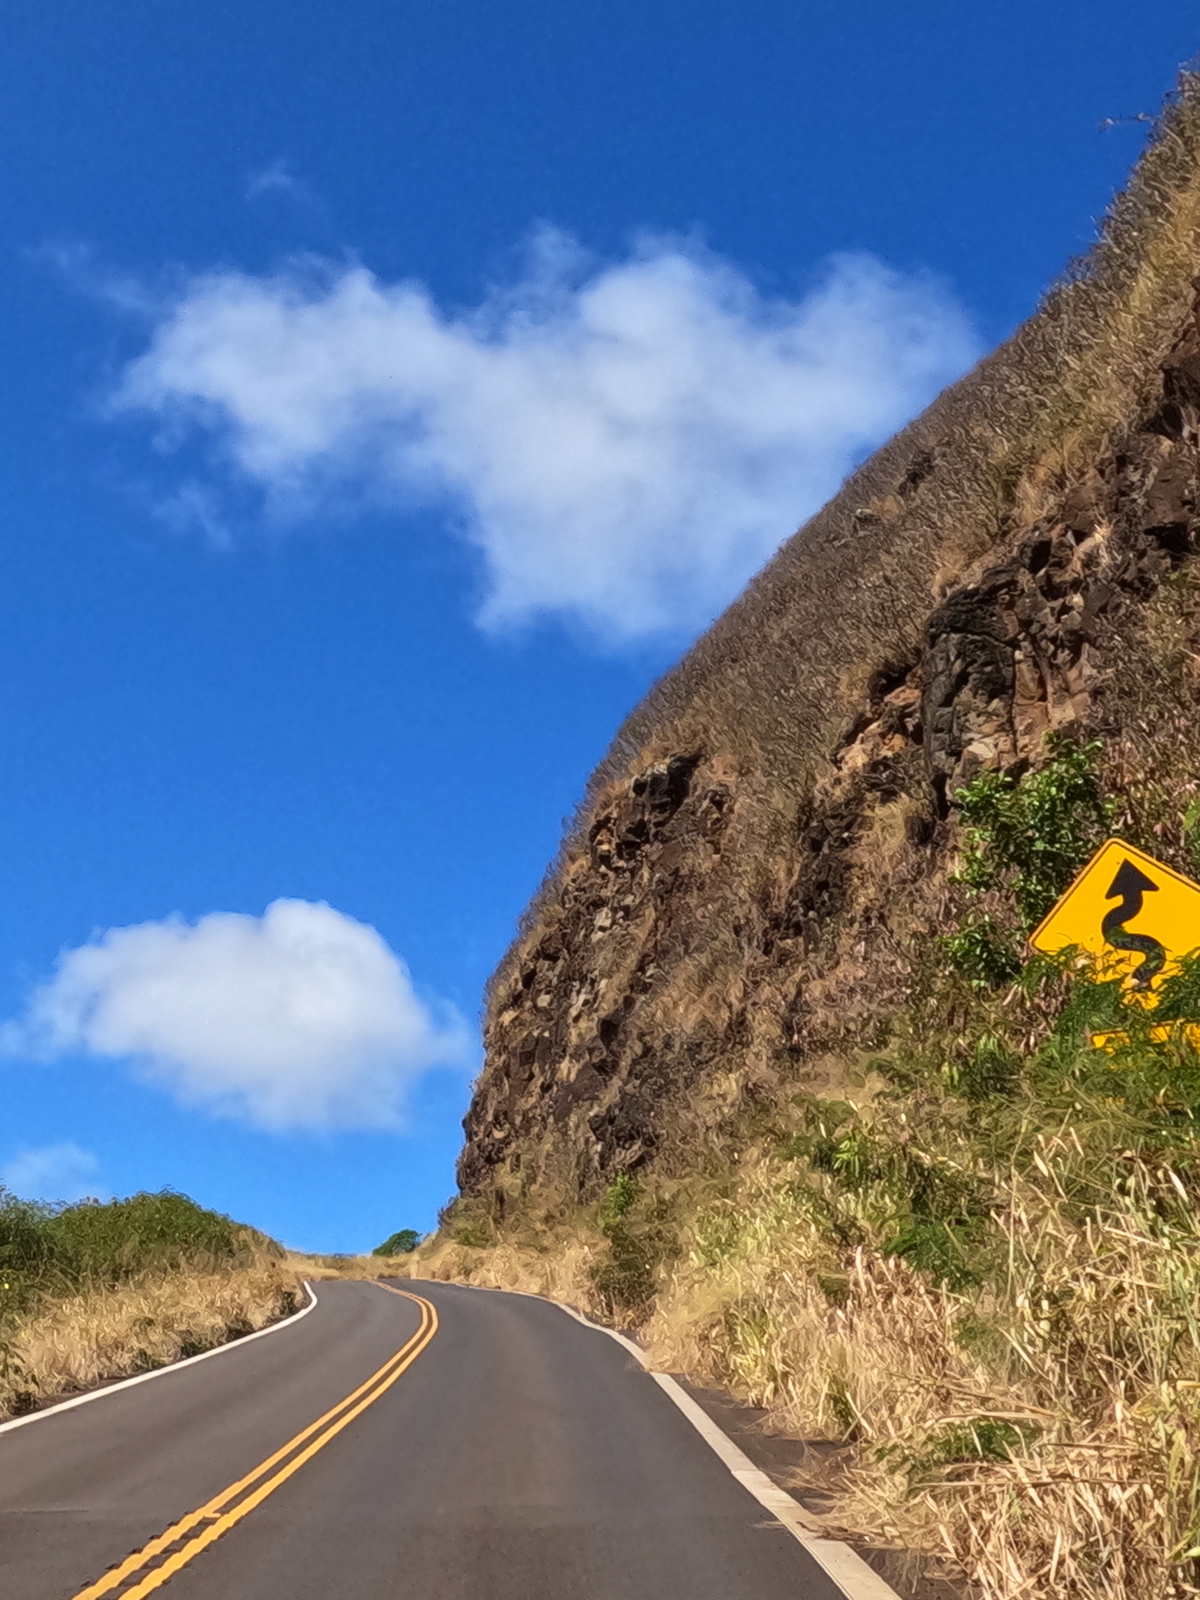 kahekili highway going uphill with yellow curvy road sign and cliff